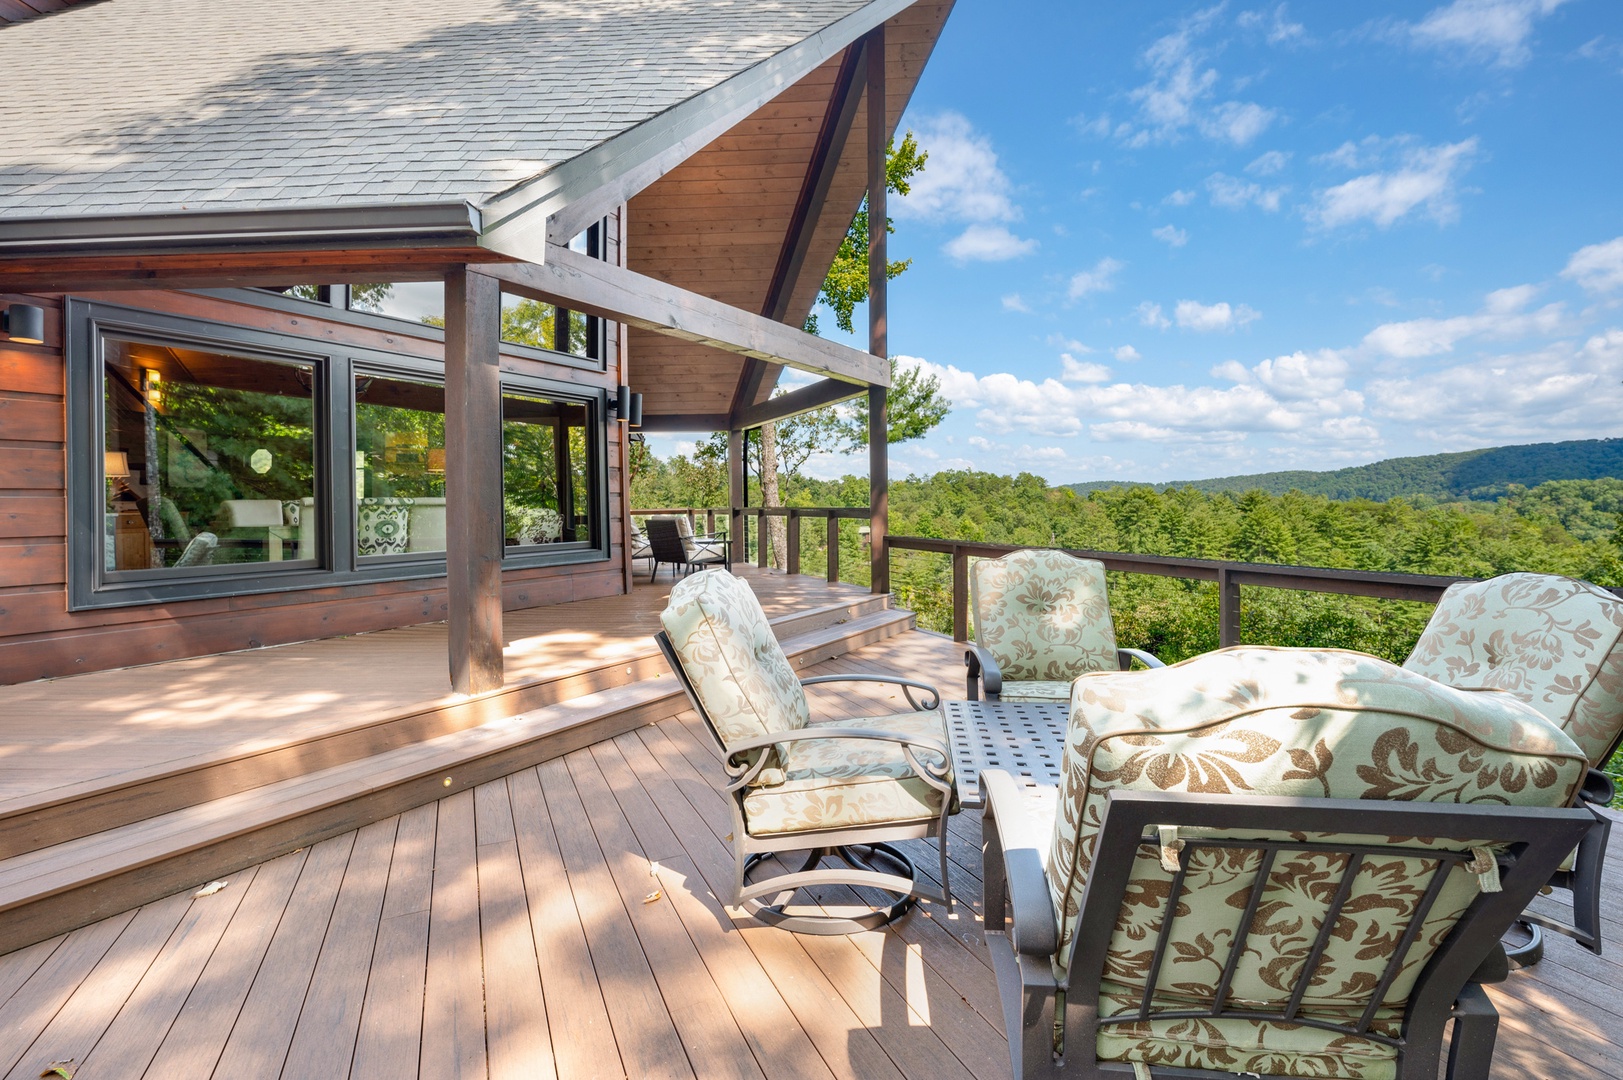 Kricket's Overlook-Entry level open area of the deck with outdoor seating